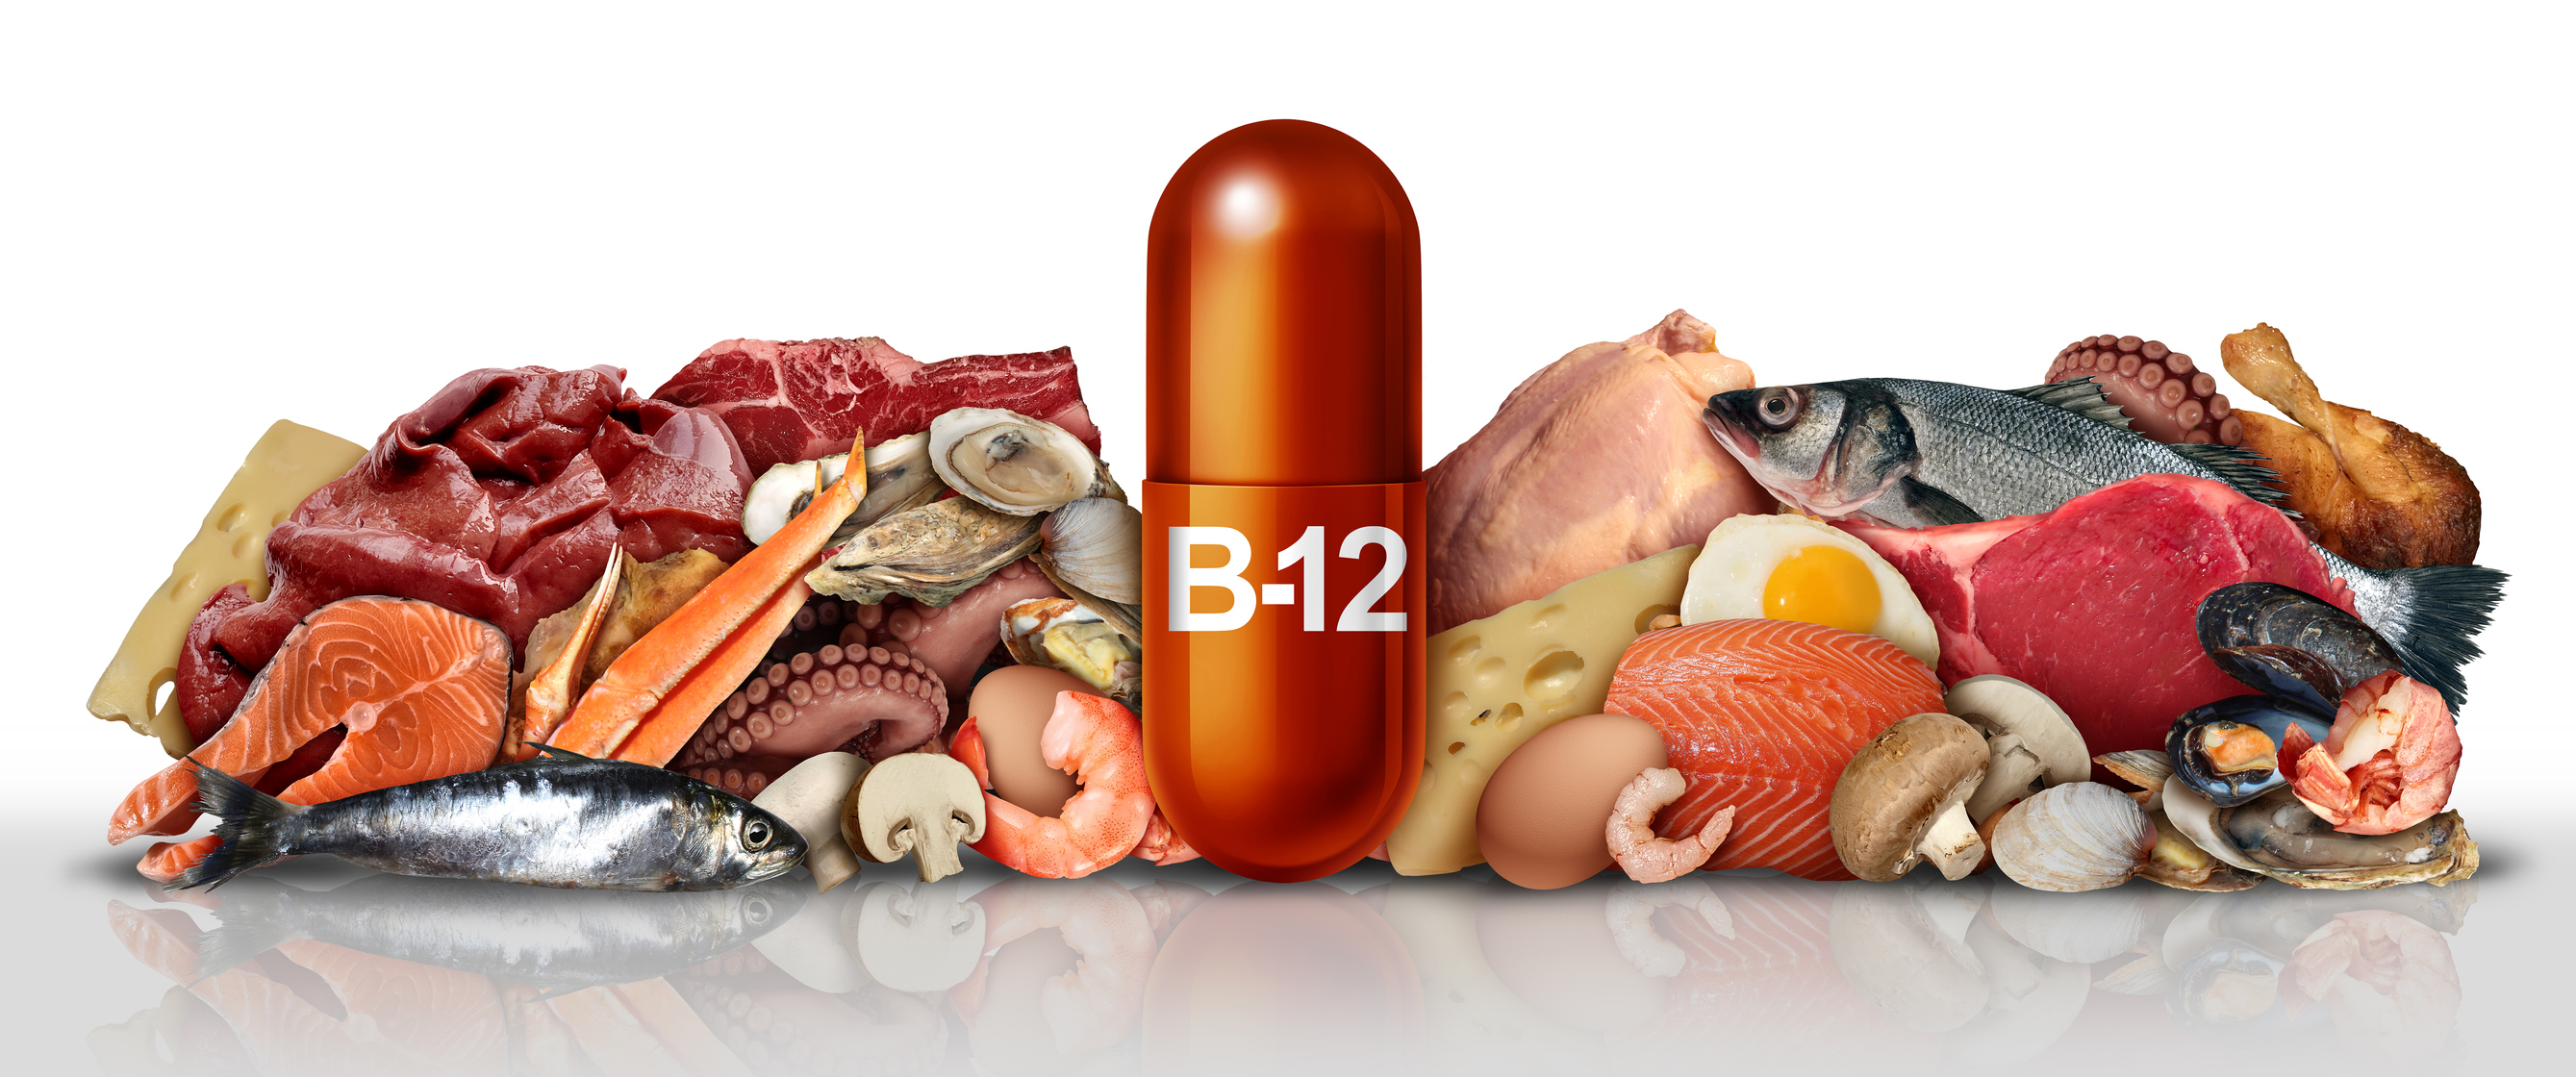 Products containing vitamin B12